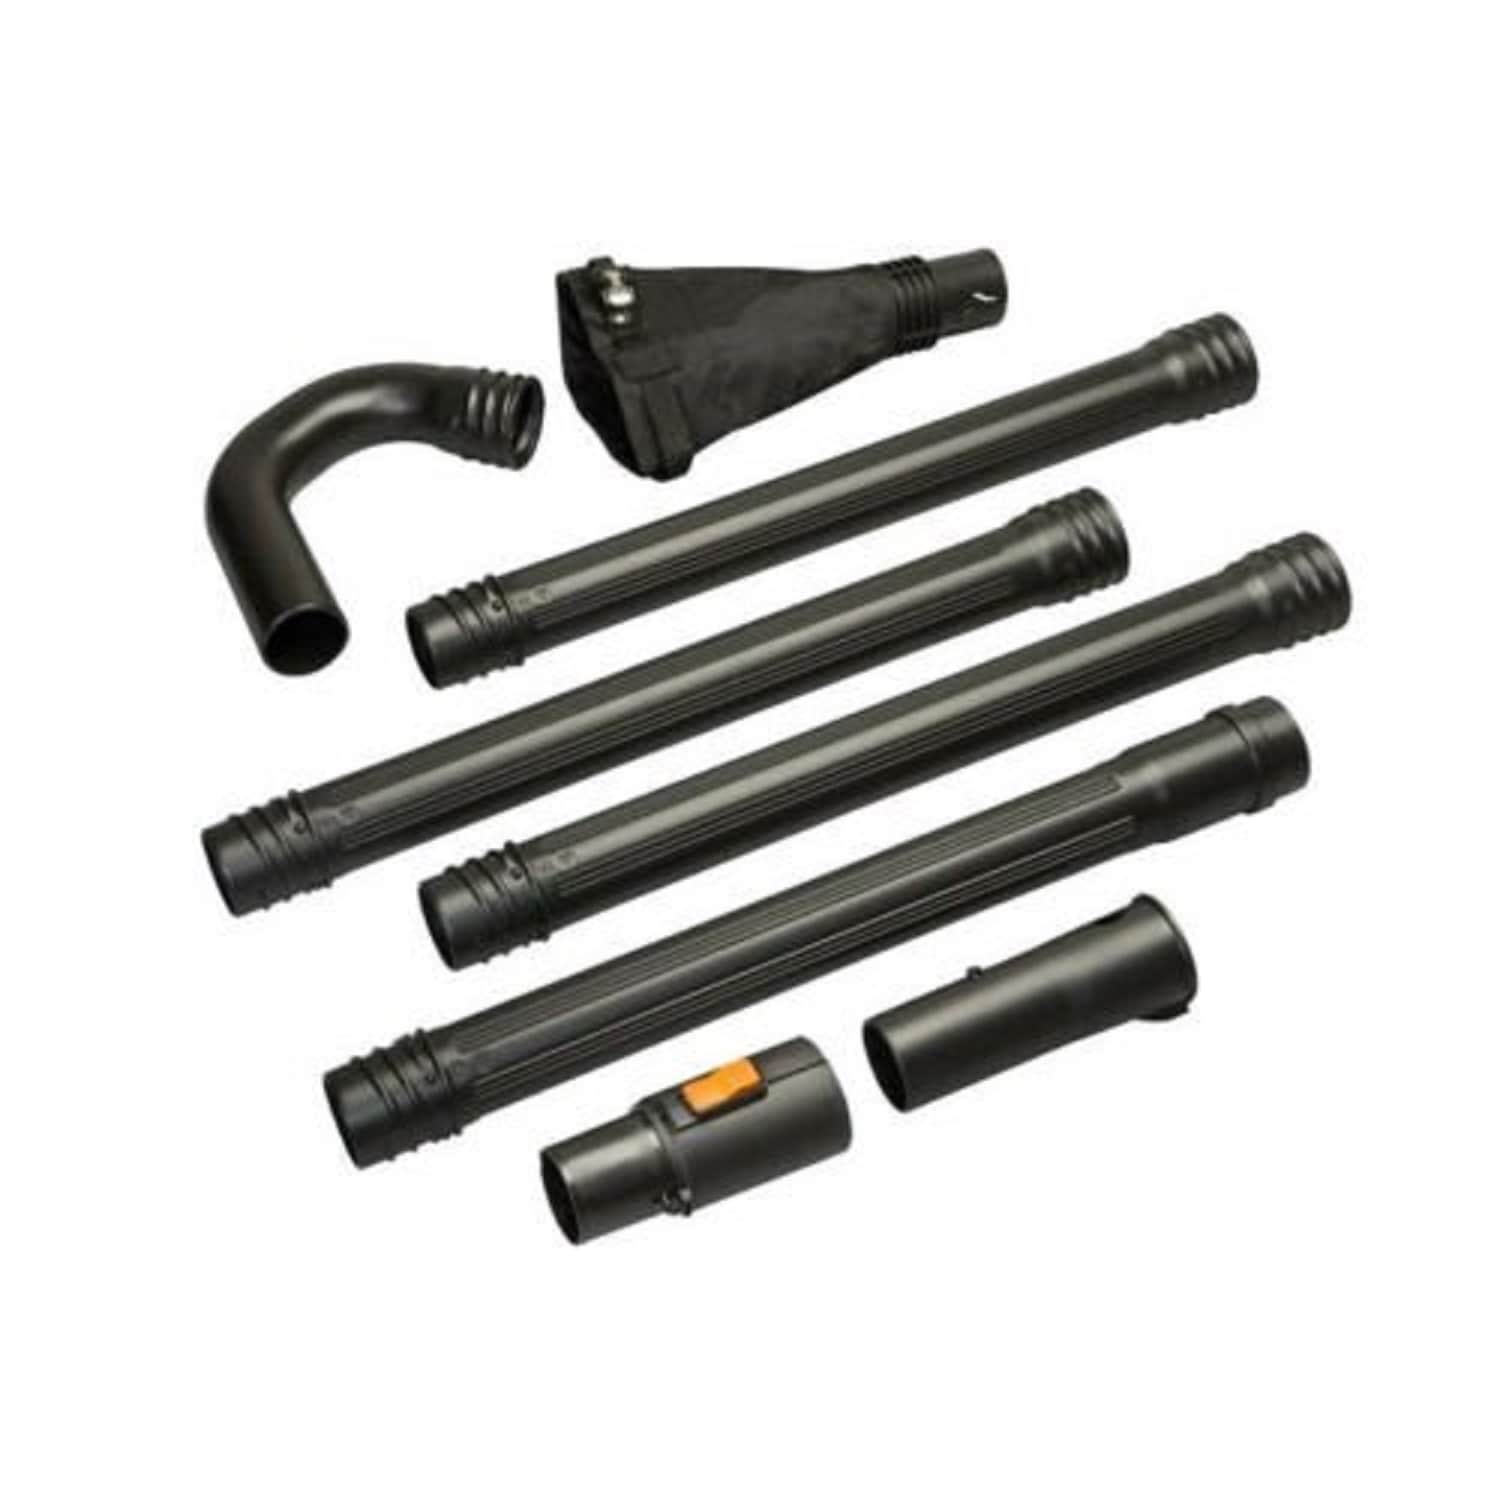 Leaf Blower Accessories at